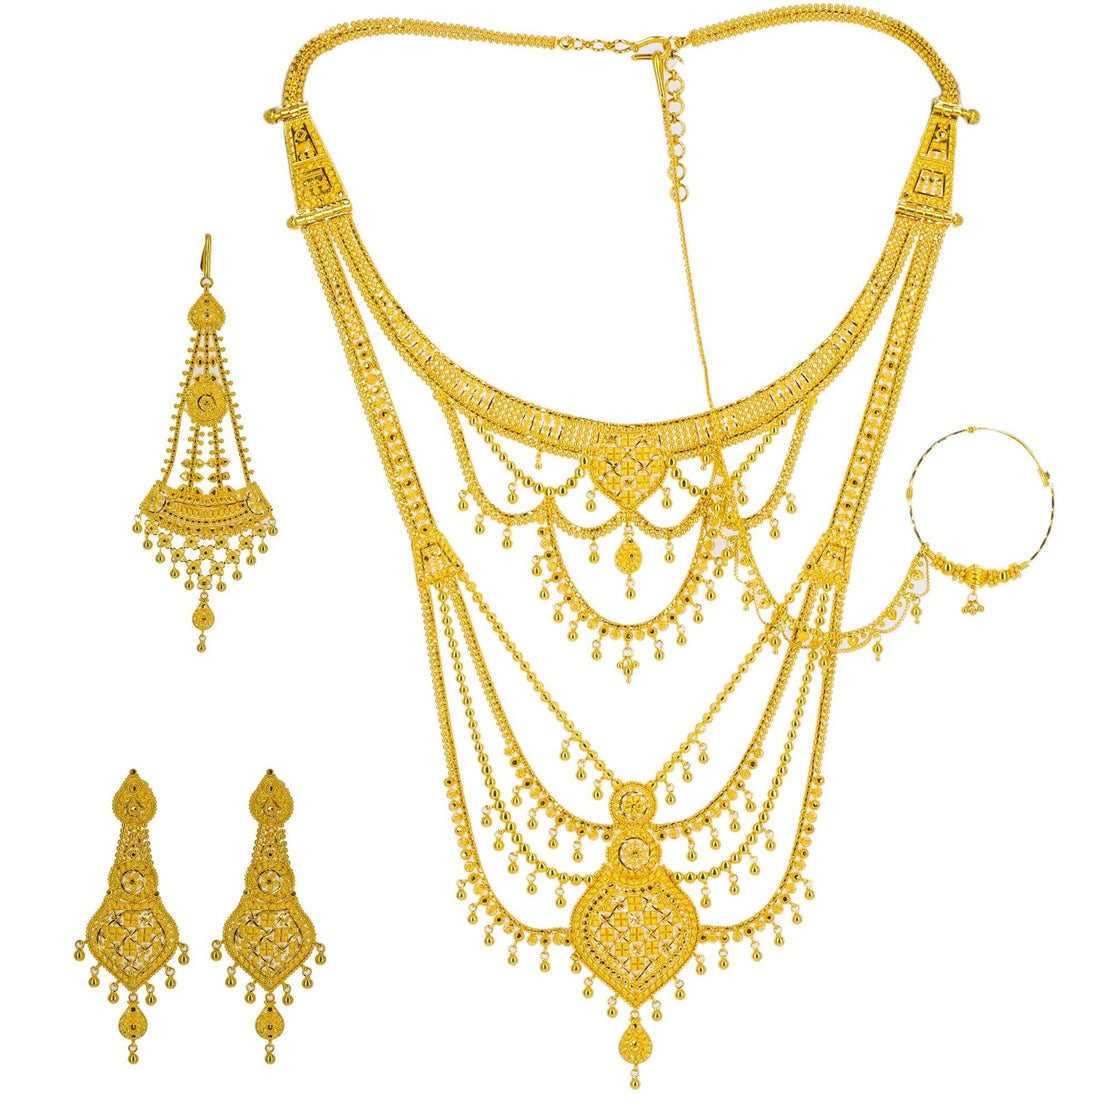 Long Indian Necklaces - Find Jewelry For Every Event